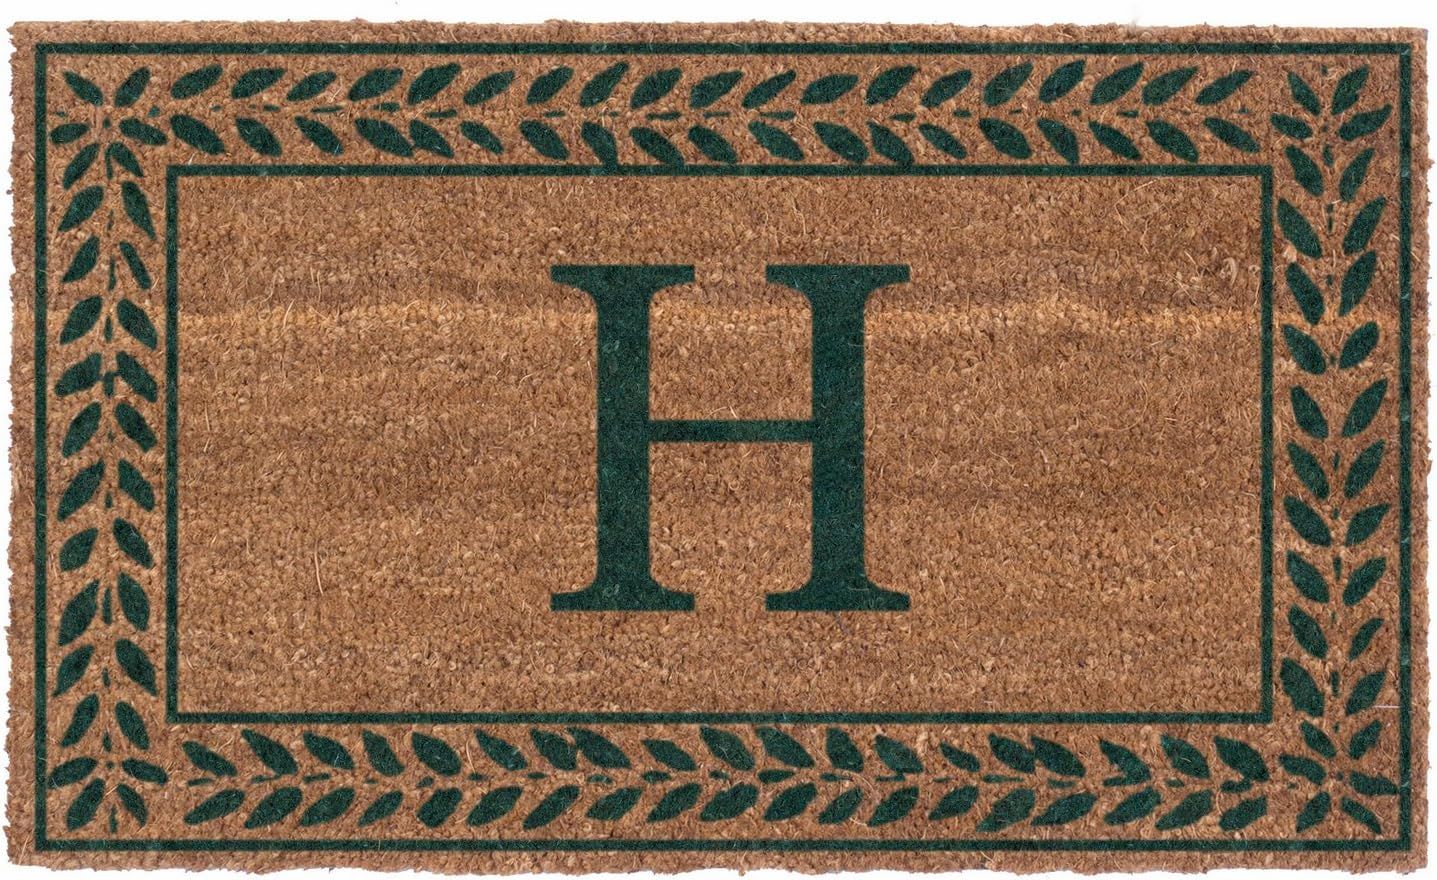 Green Leafy Vines Bordered Monogrammed Coco Doormat by Coco Mats N' More - 18" x 30" with Vinyl B... | Amazon (US)